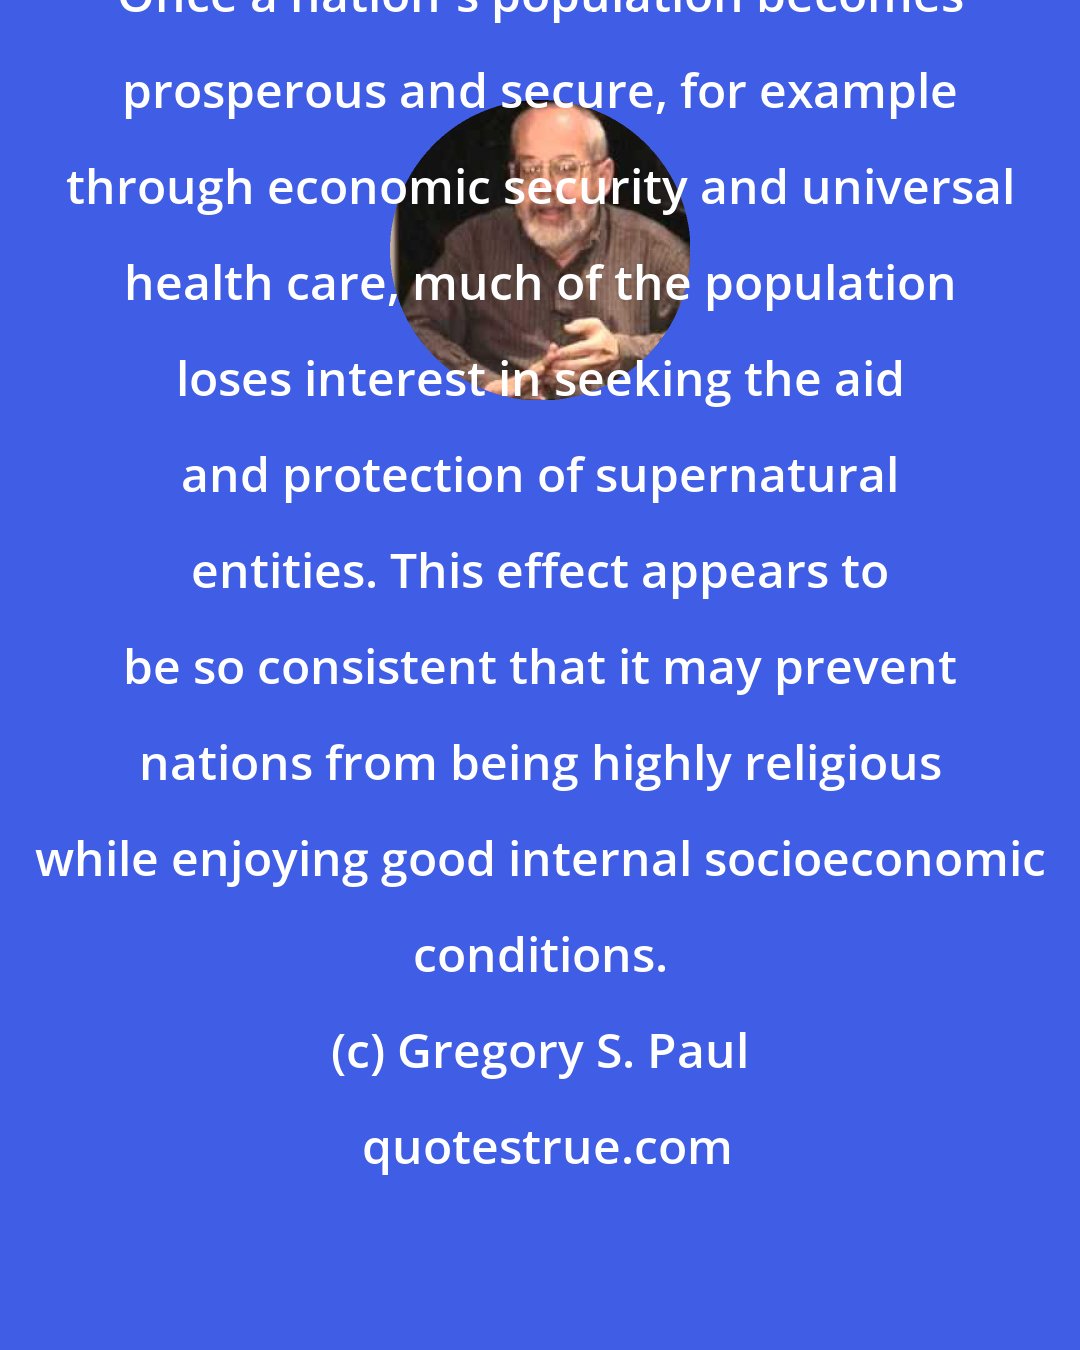 Gregory S. Paul: Once a nation's population becomes prosperous and secure, for example through economic security and universal health care, much of the population loses interest in seeking the aid and protection of supernatural entities. This effect appears to be so consistent that it may prevent nations from being highly religious while enjoying good internal socioeconomic conditions.